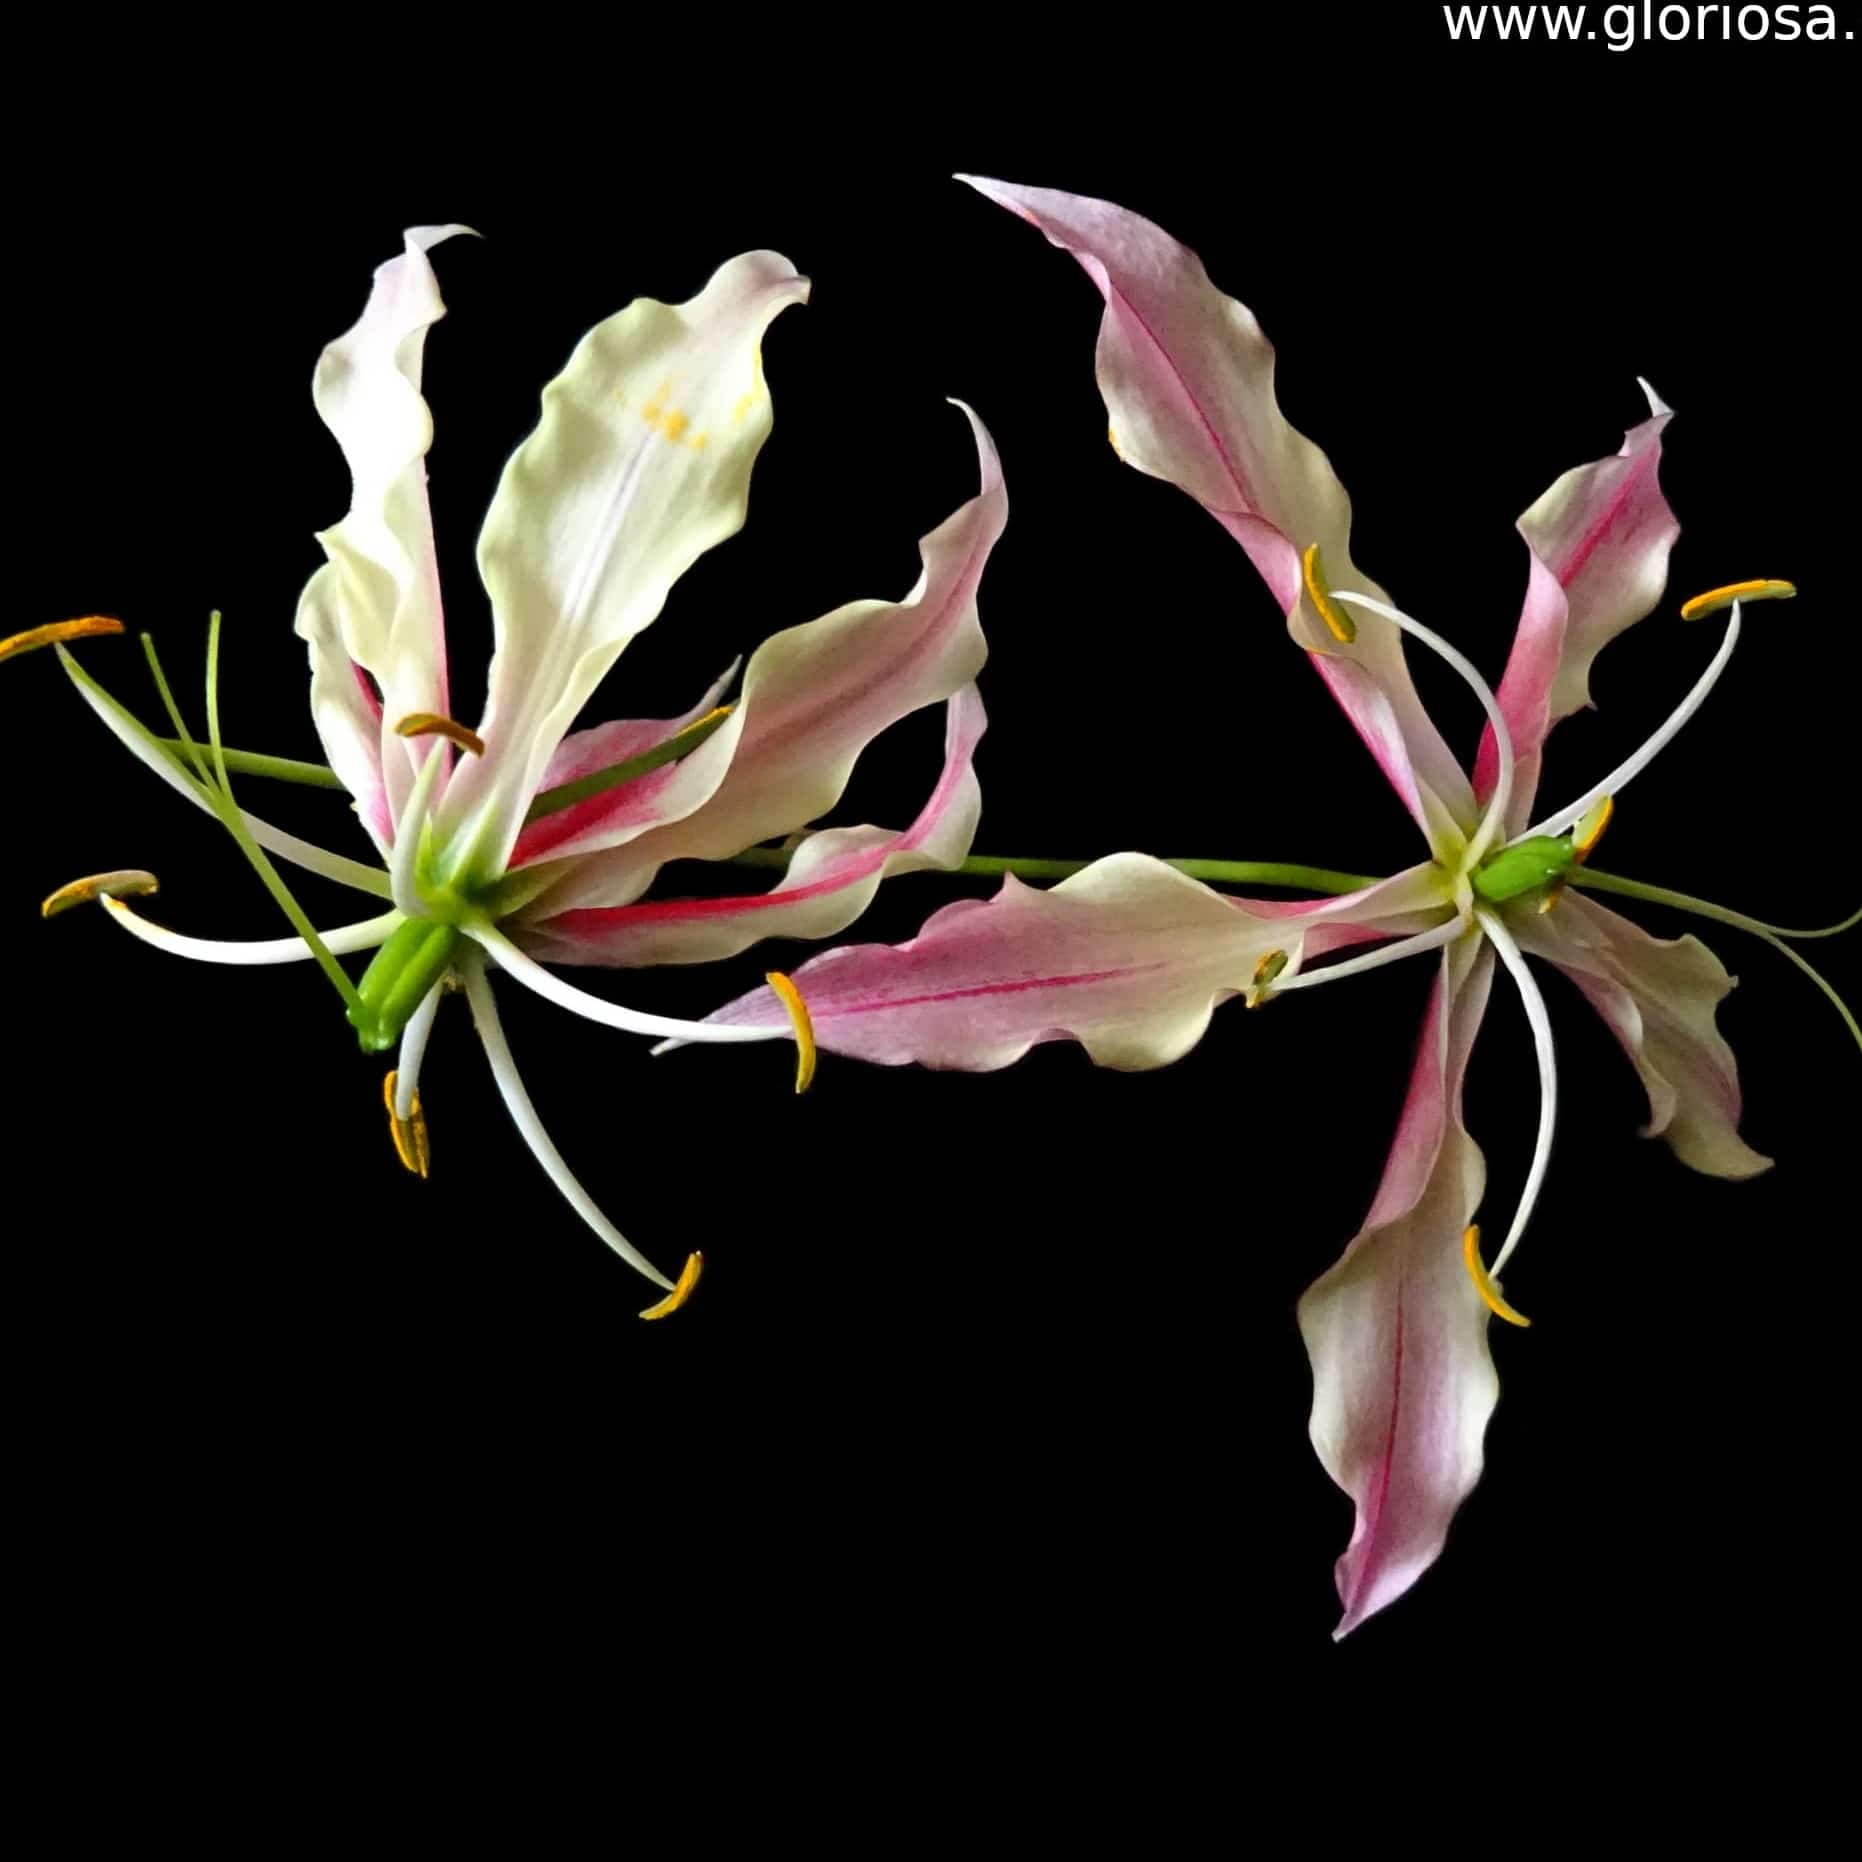 Gloriosa Lime; One young flower and one more mature.